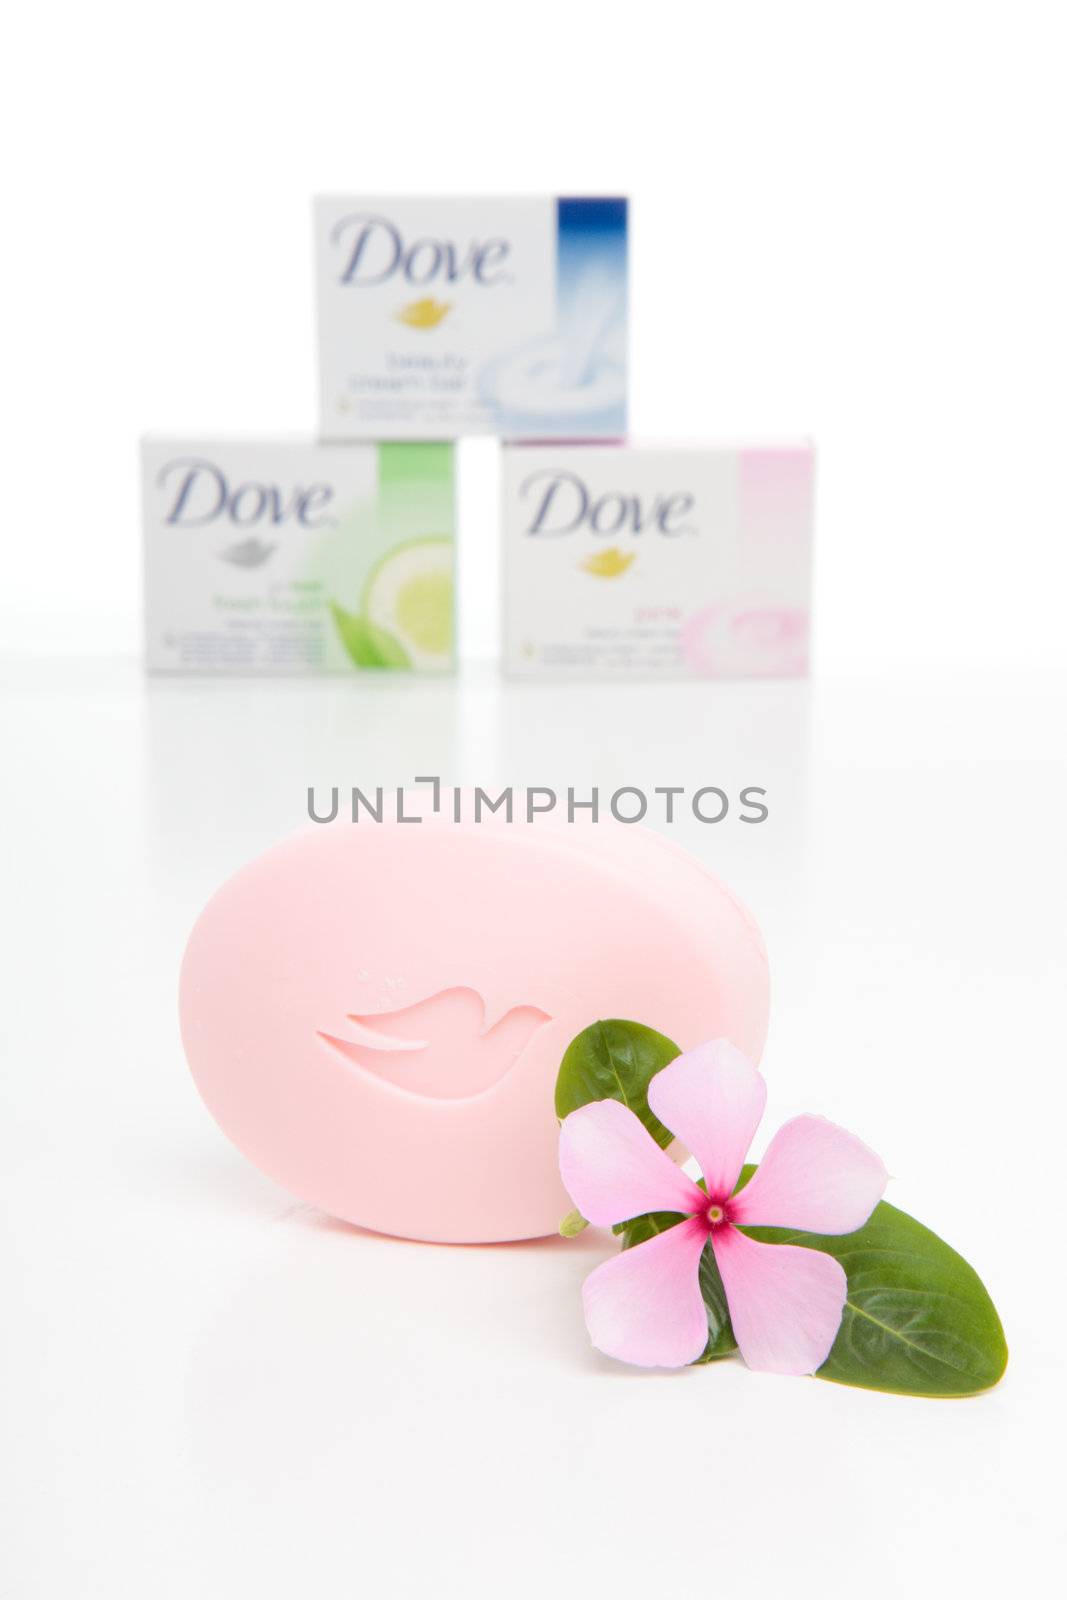 A selection of Dove cream beauty soap bars with a pink soap in the foreground.  White background.  Editorial use only.